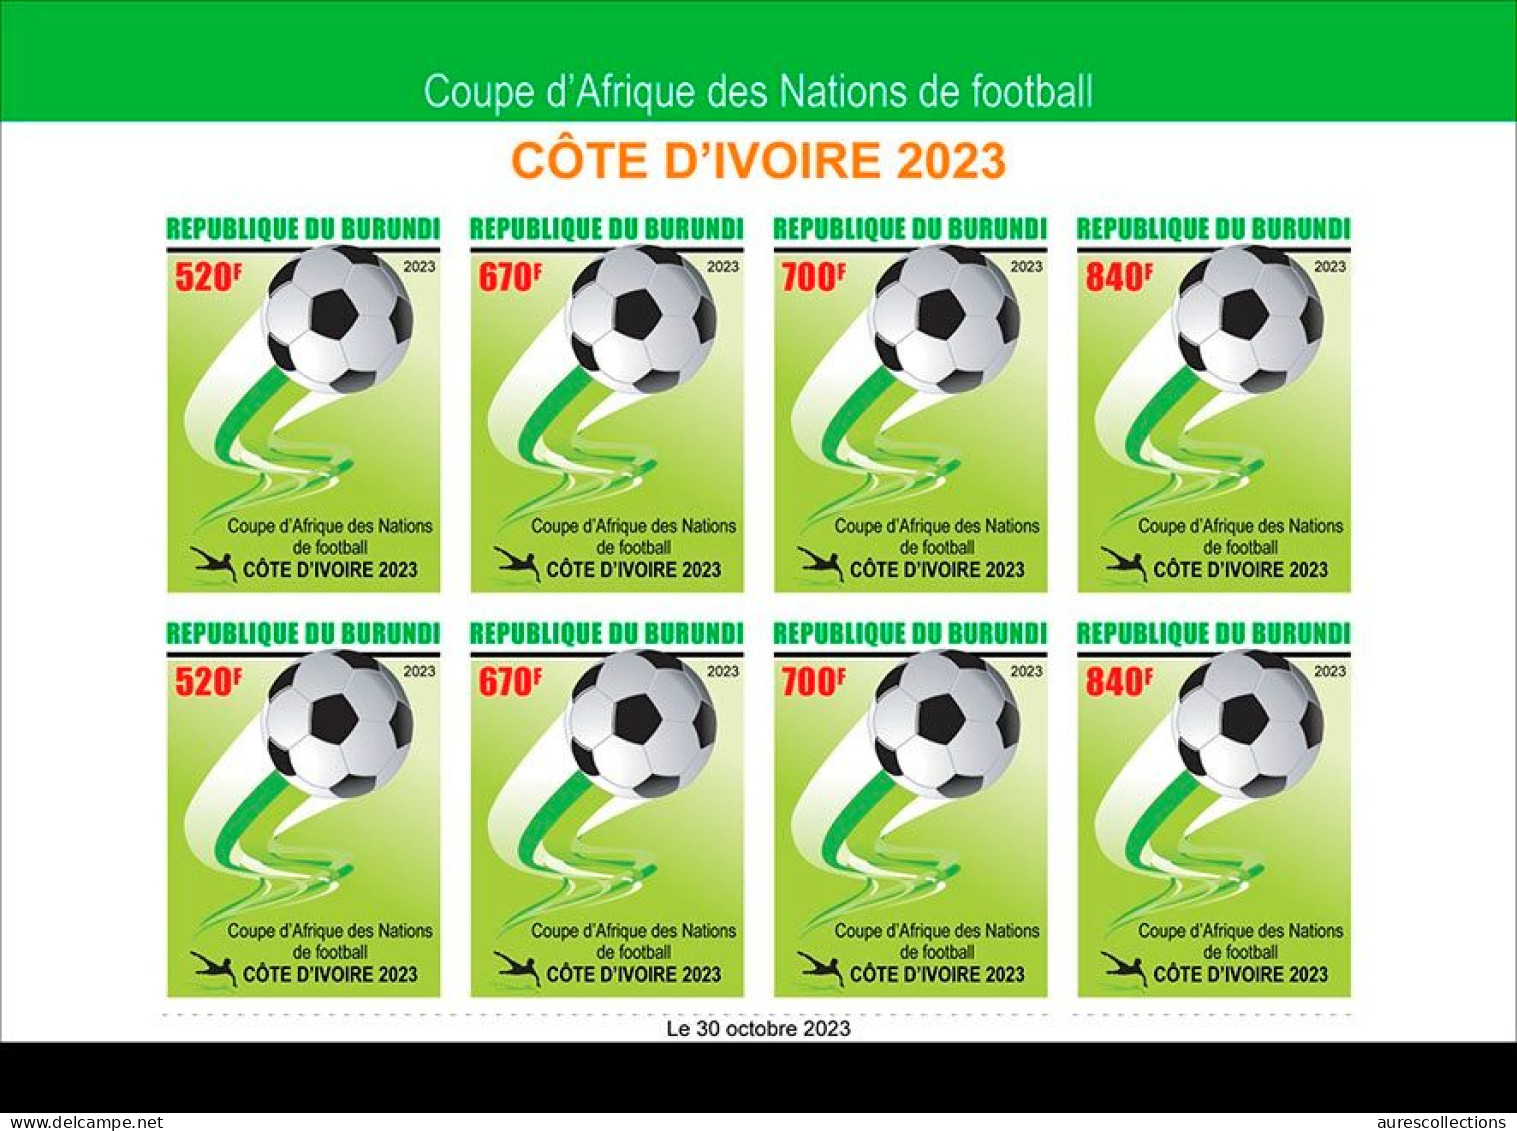 BURUNDI 2023 AUTHENTIC IMPERF SHEET 8V - FOOTBALL SOCCER AFRICA CUP OF NATIONS IVORY COAST COTE D' IVOIRE - MNH - Africa Cup Of Nations